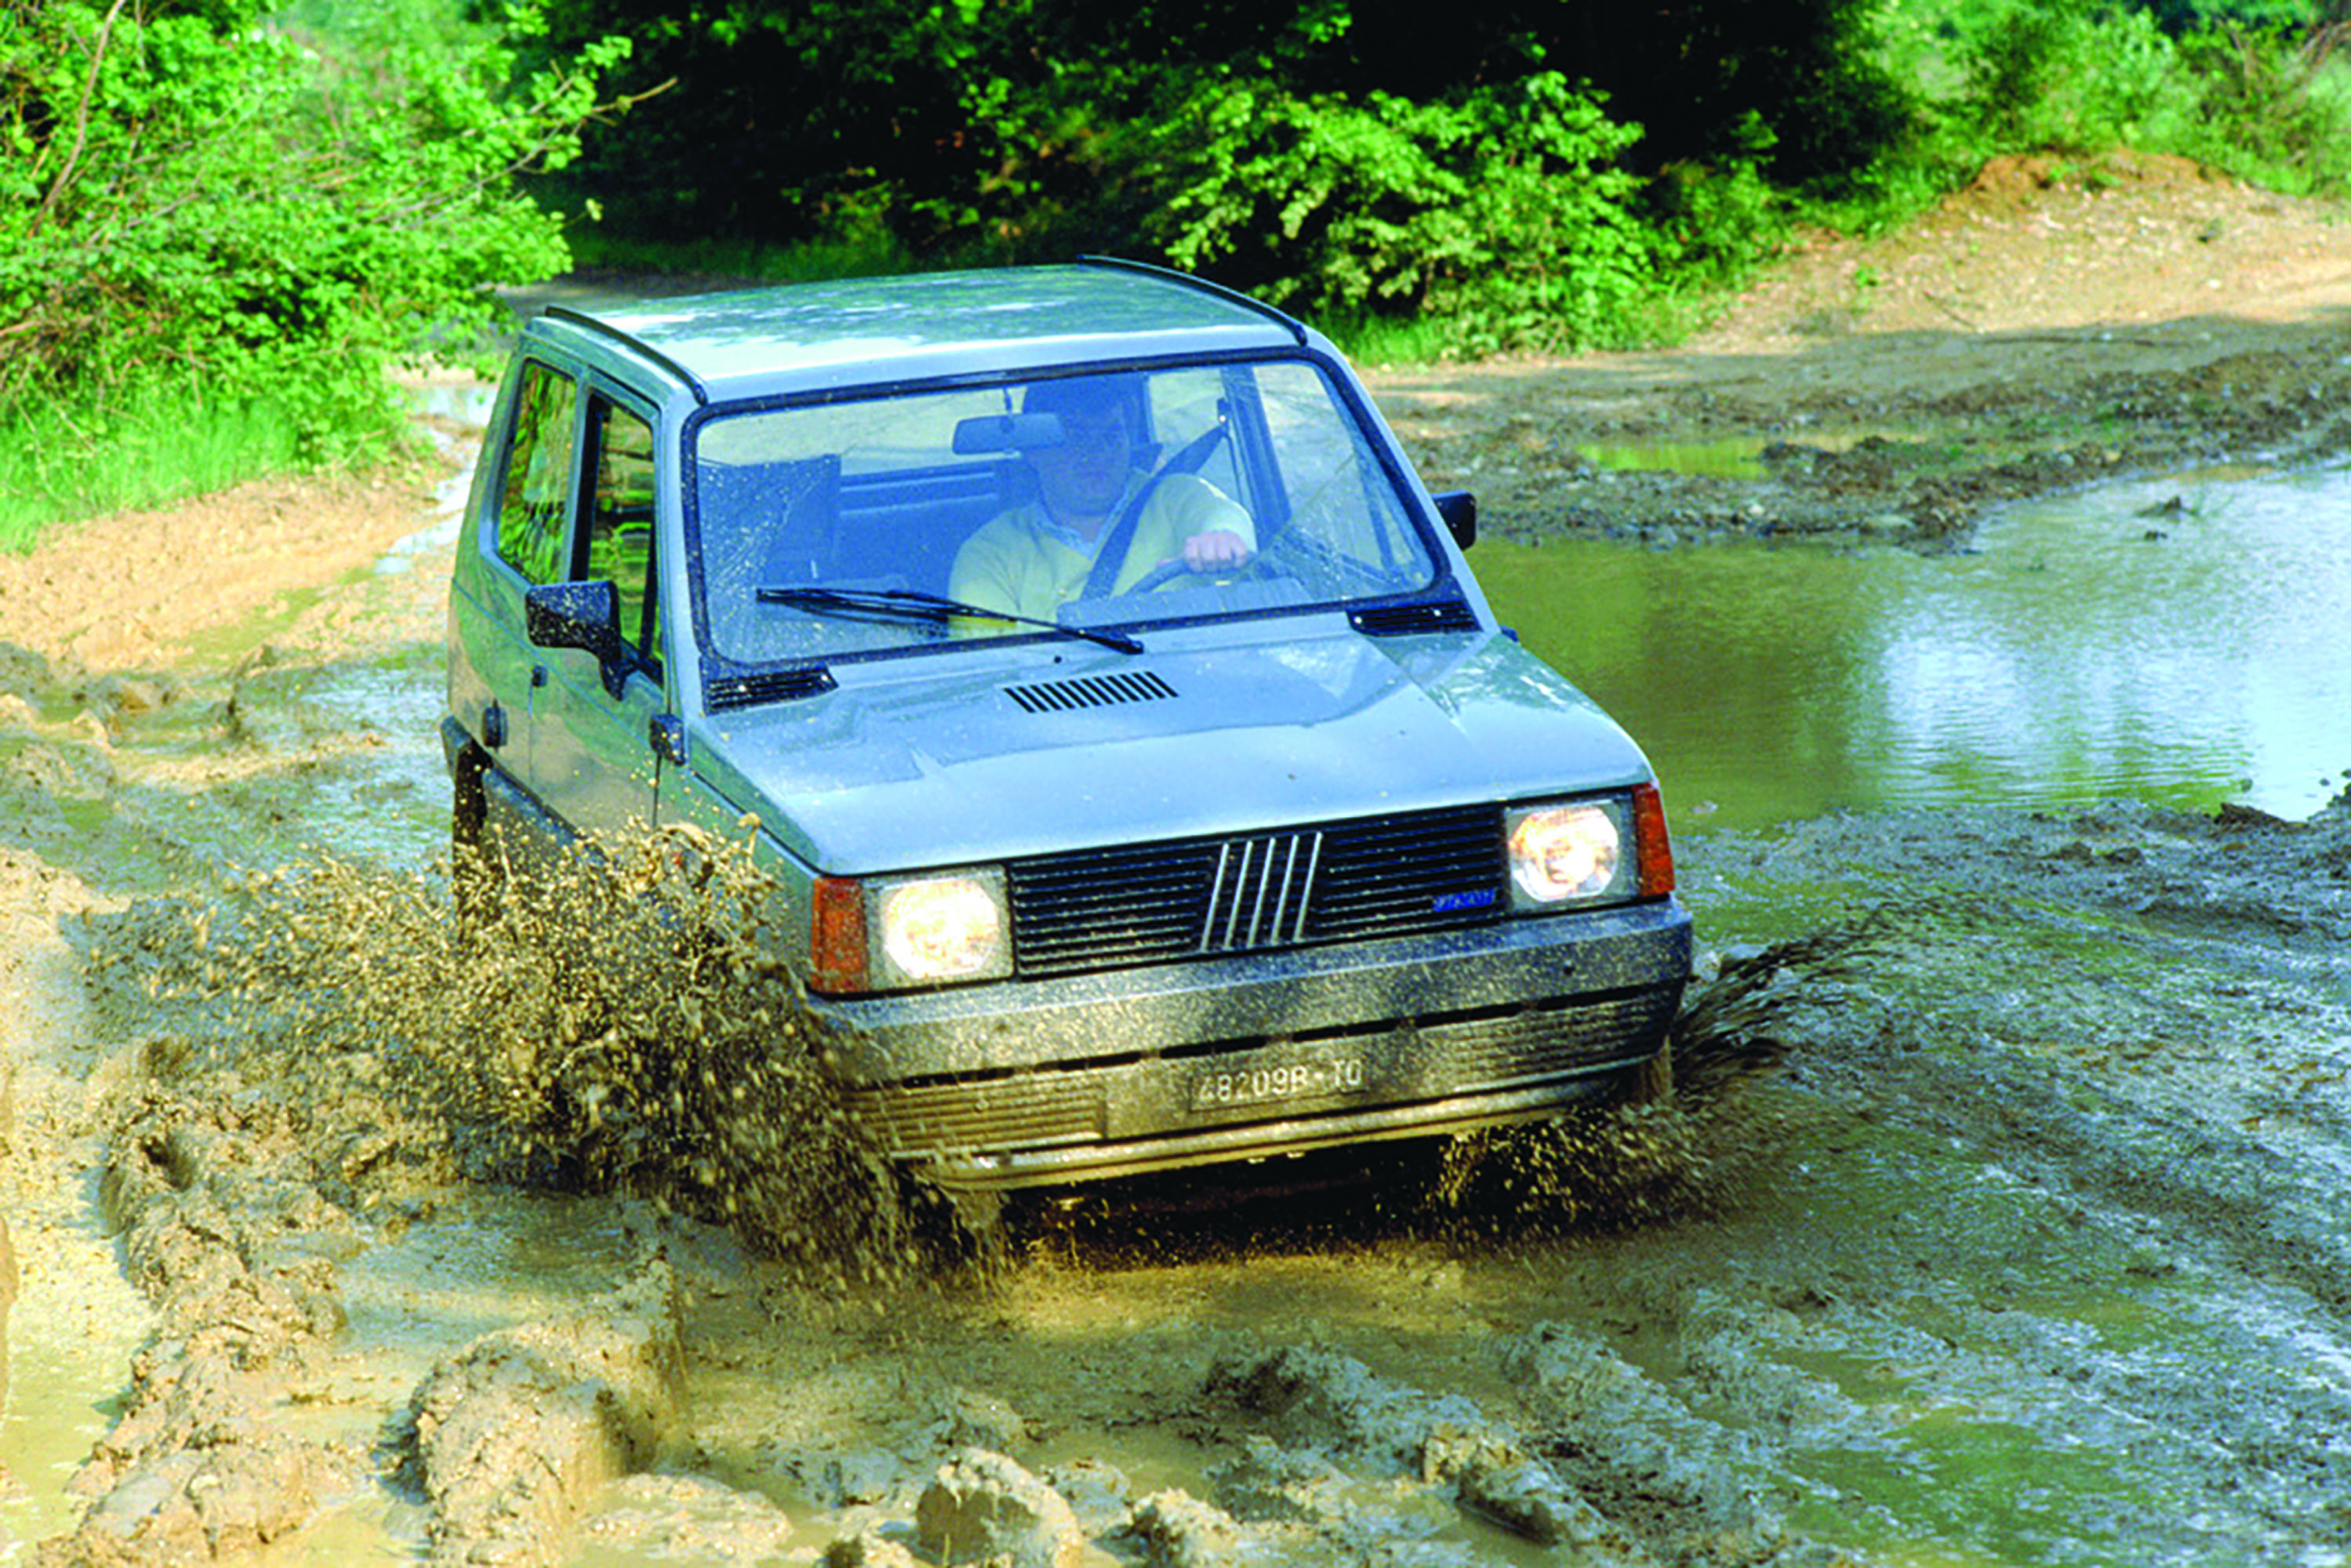 The Fiat Panda 4x4 Was A City Car That Could Go Anywhere